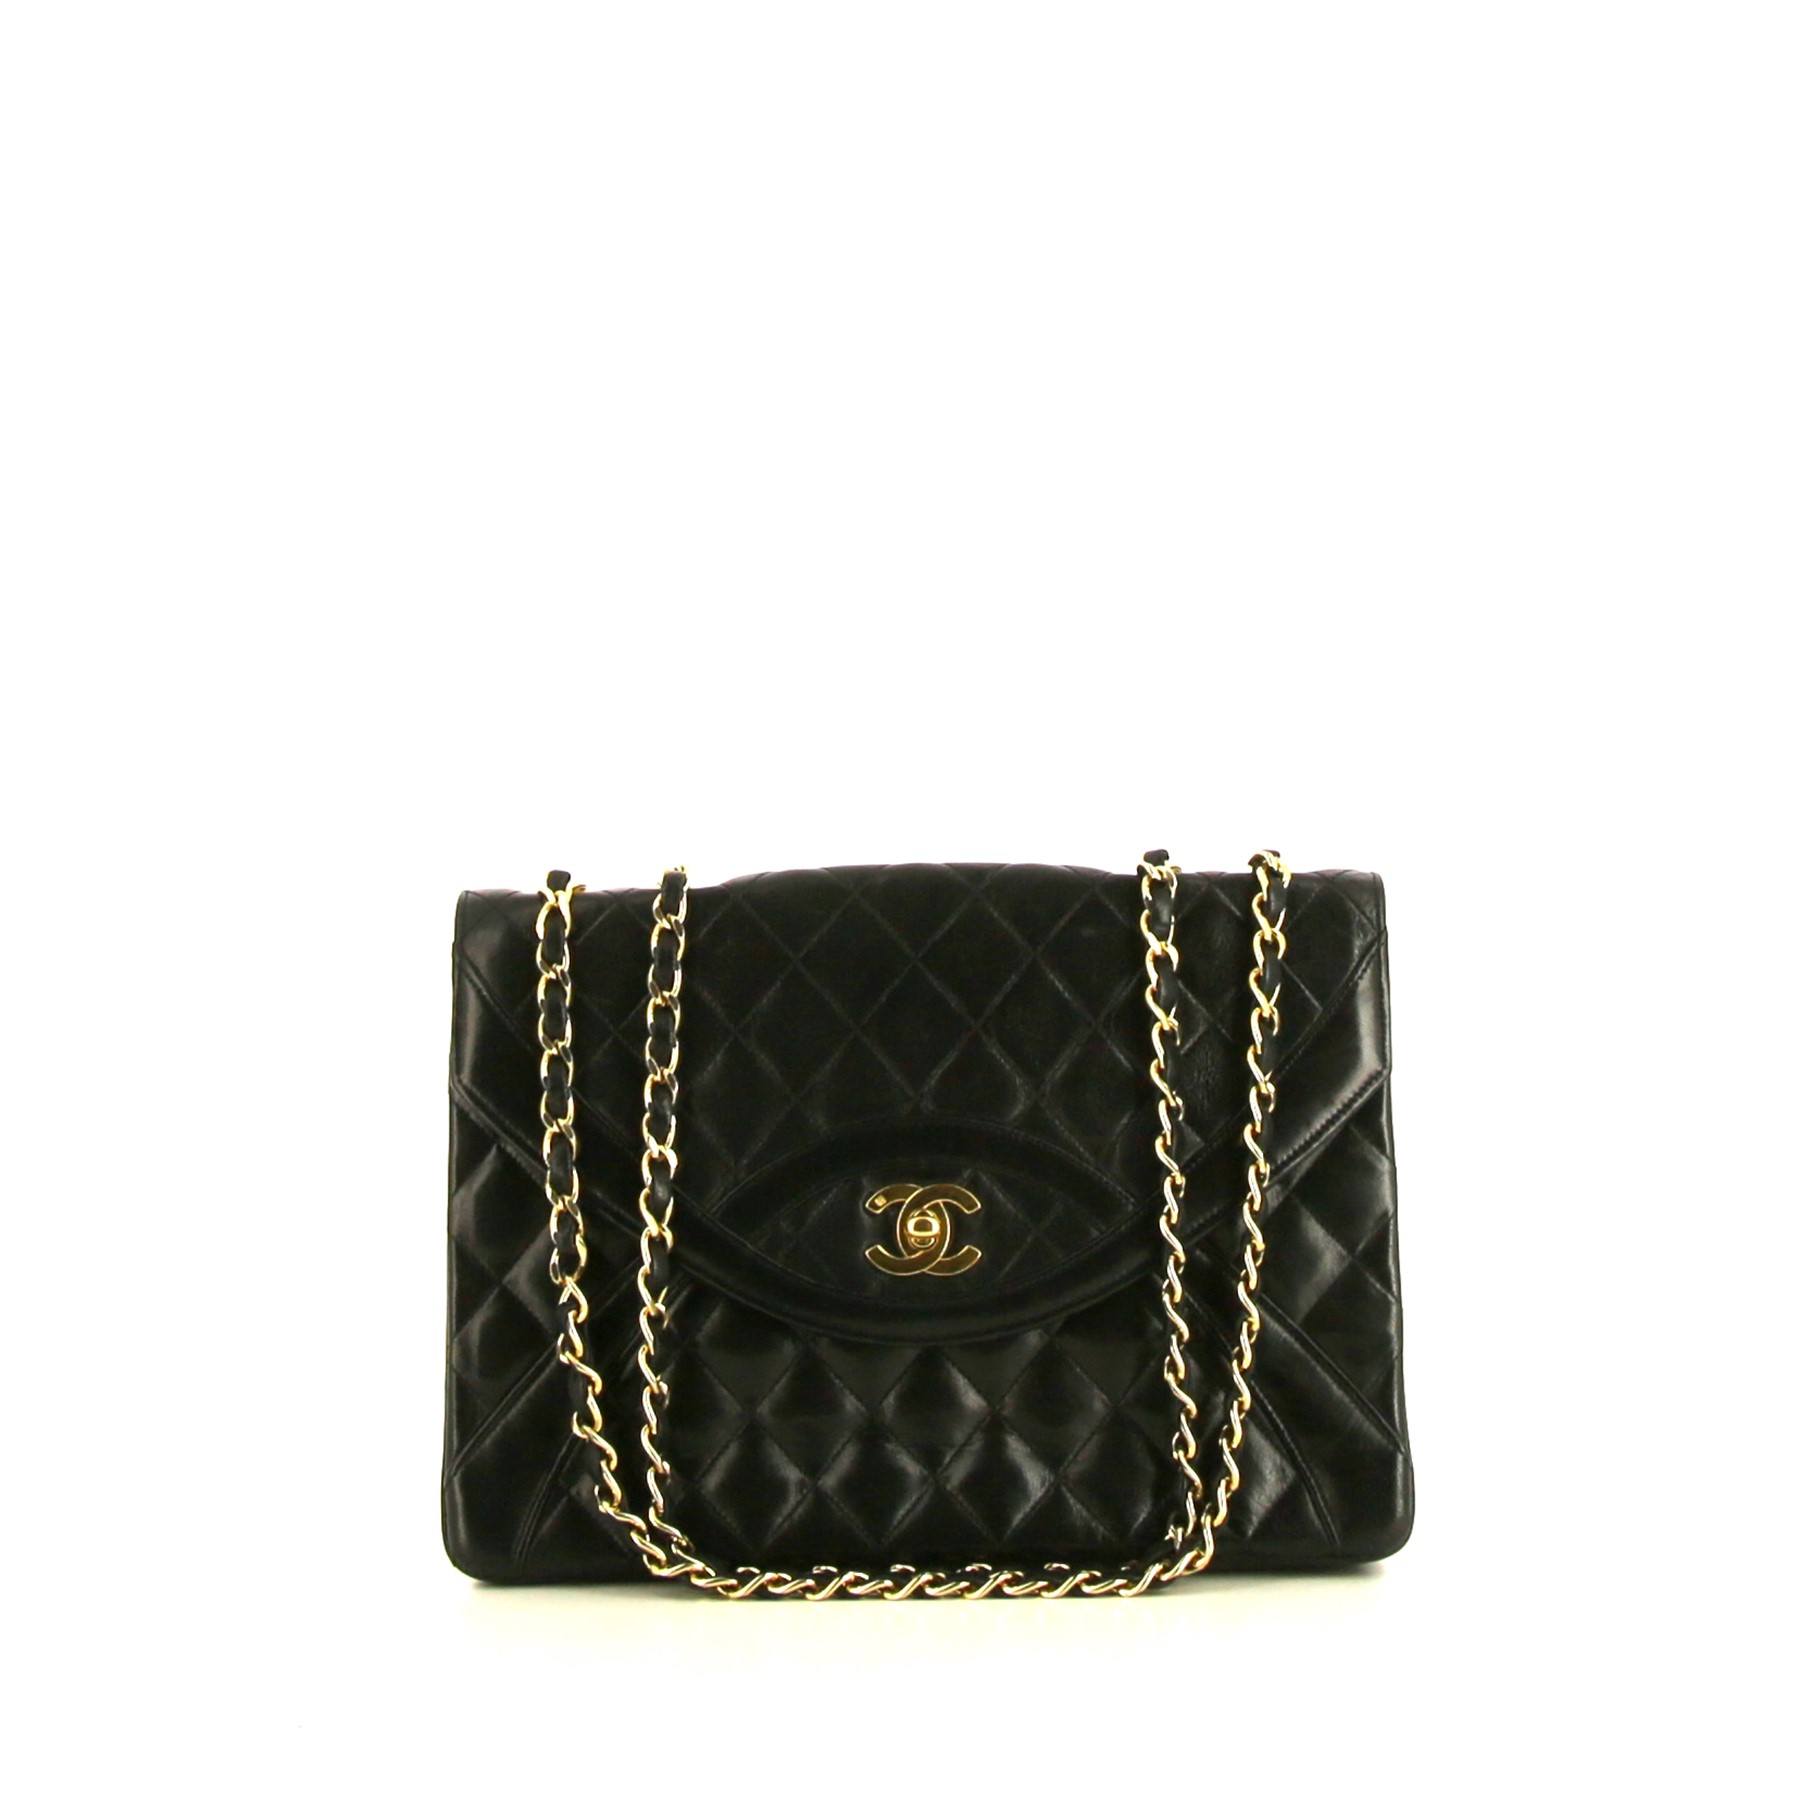 Handbag In Black Quilted Leather